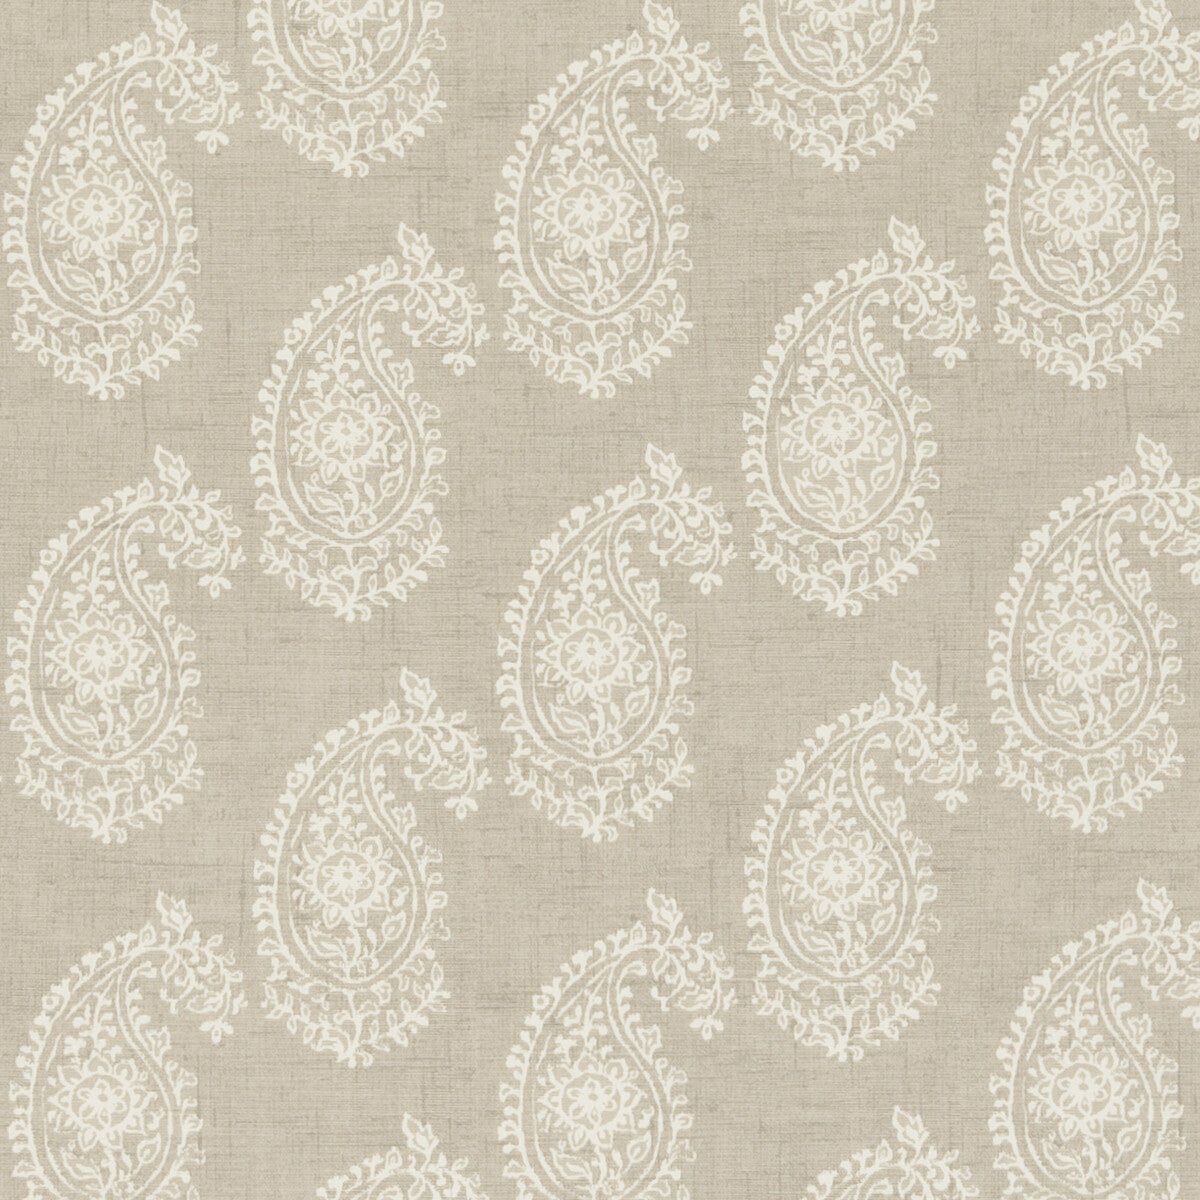 Harriet fabric in linen color - pattern F0623/02.CAC.0 - by Clarke And Clarke in the Genevieve By Studio G For C&amp;C collection